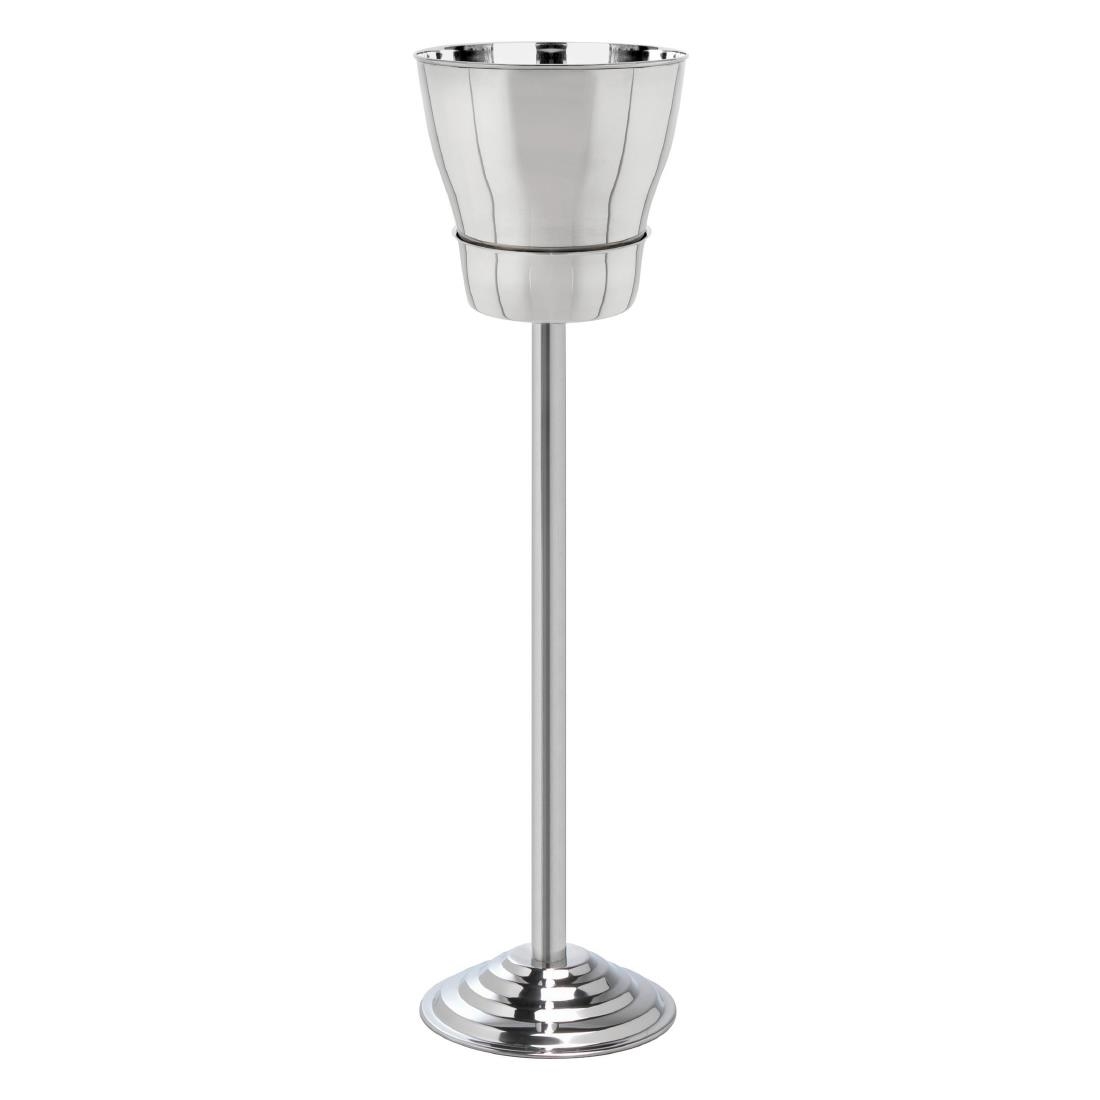 Beaumont Classique Wine/Champagne Stand Cooler